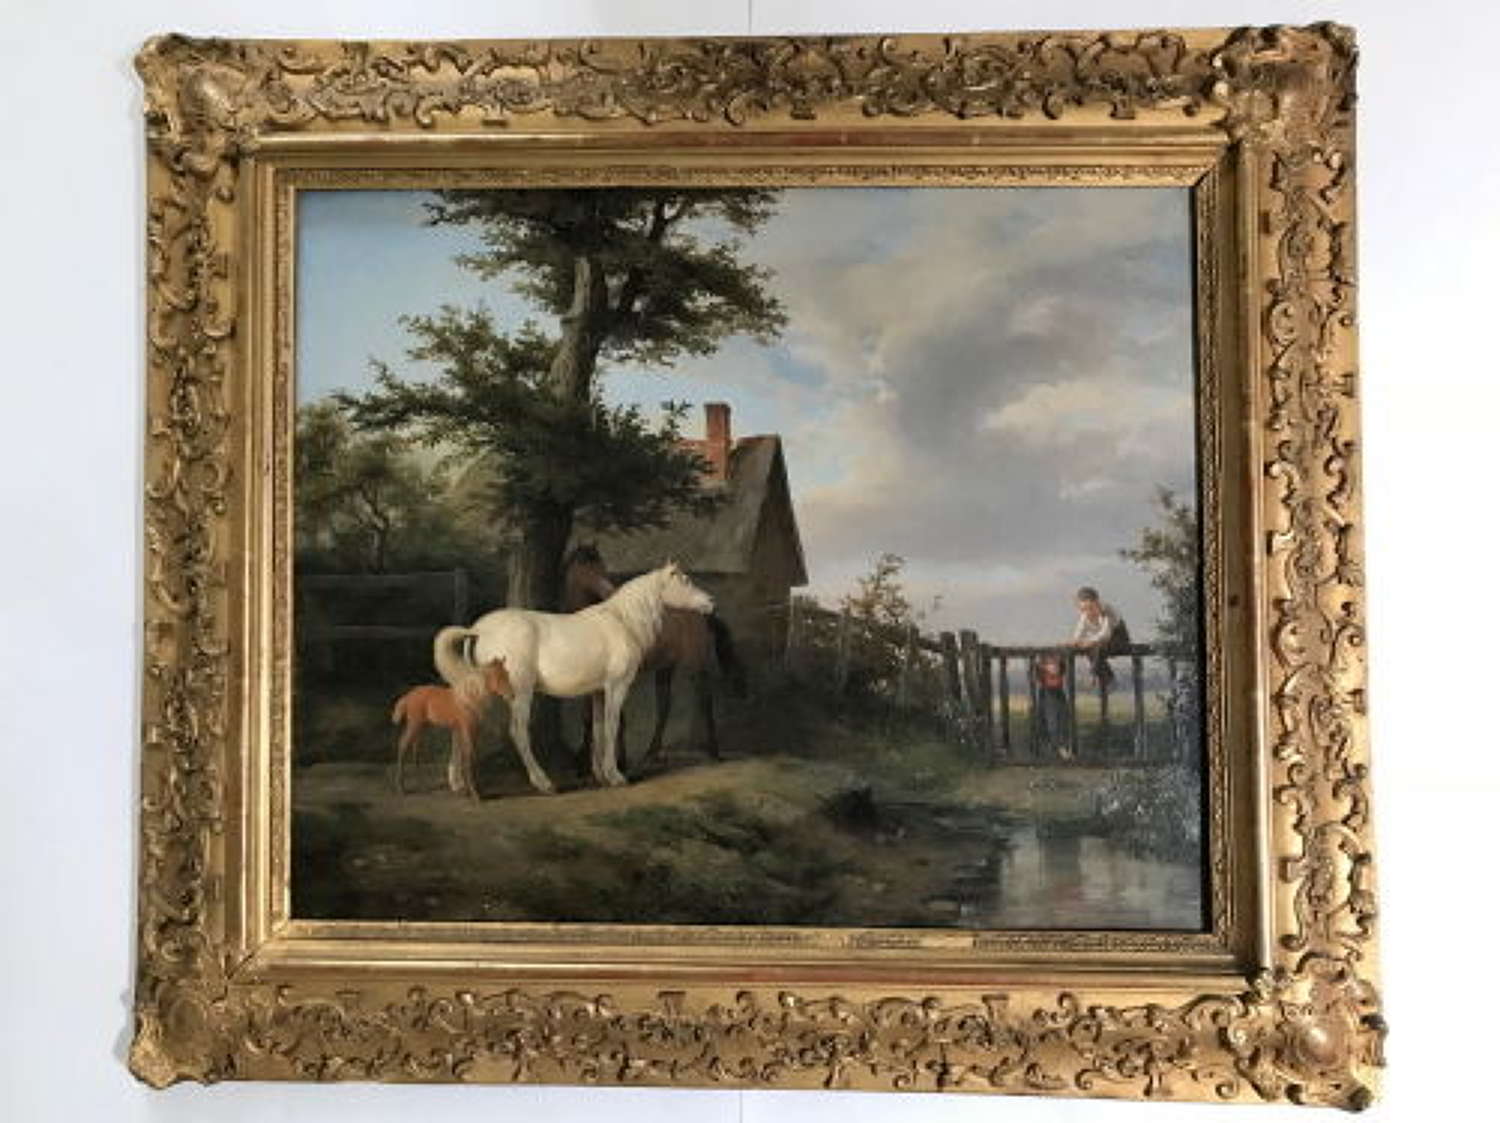 Pierre Vernet - Signed %26 Dated 1854 - Oil On Canvas